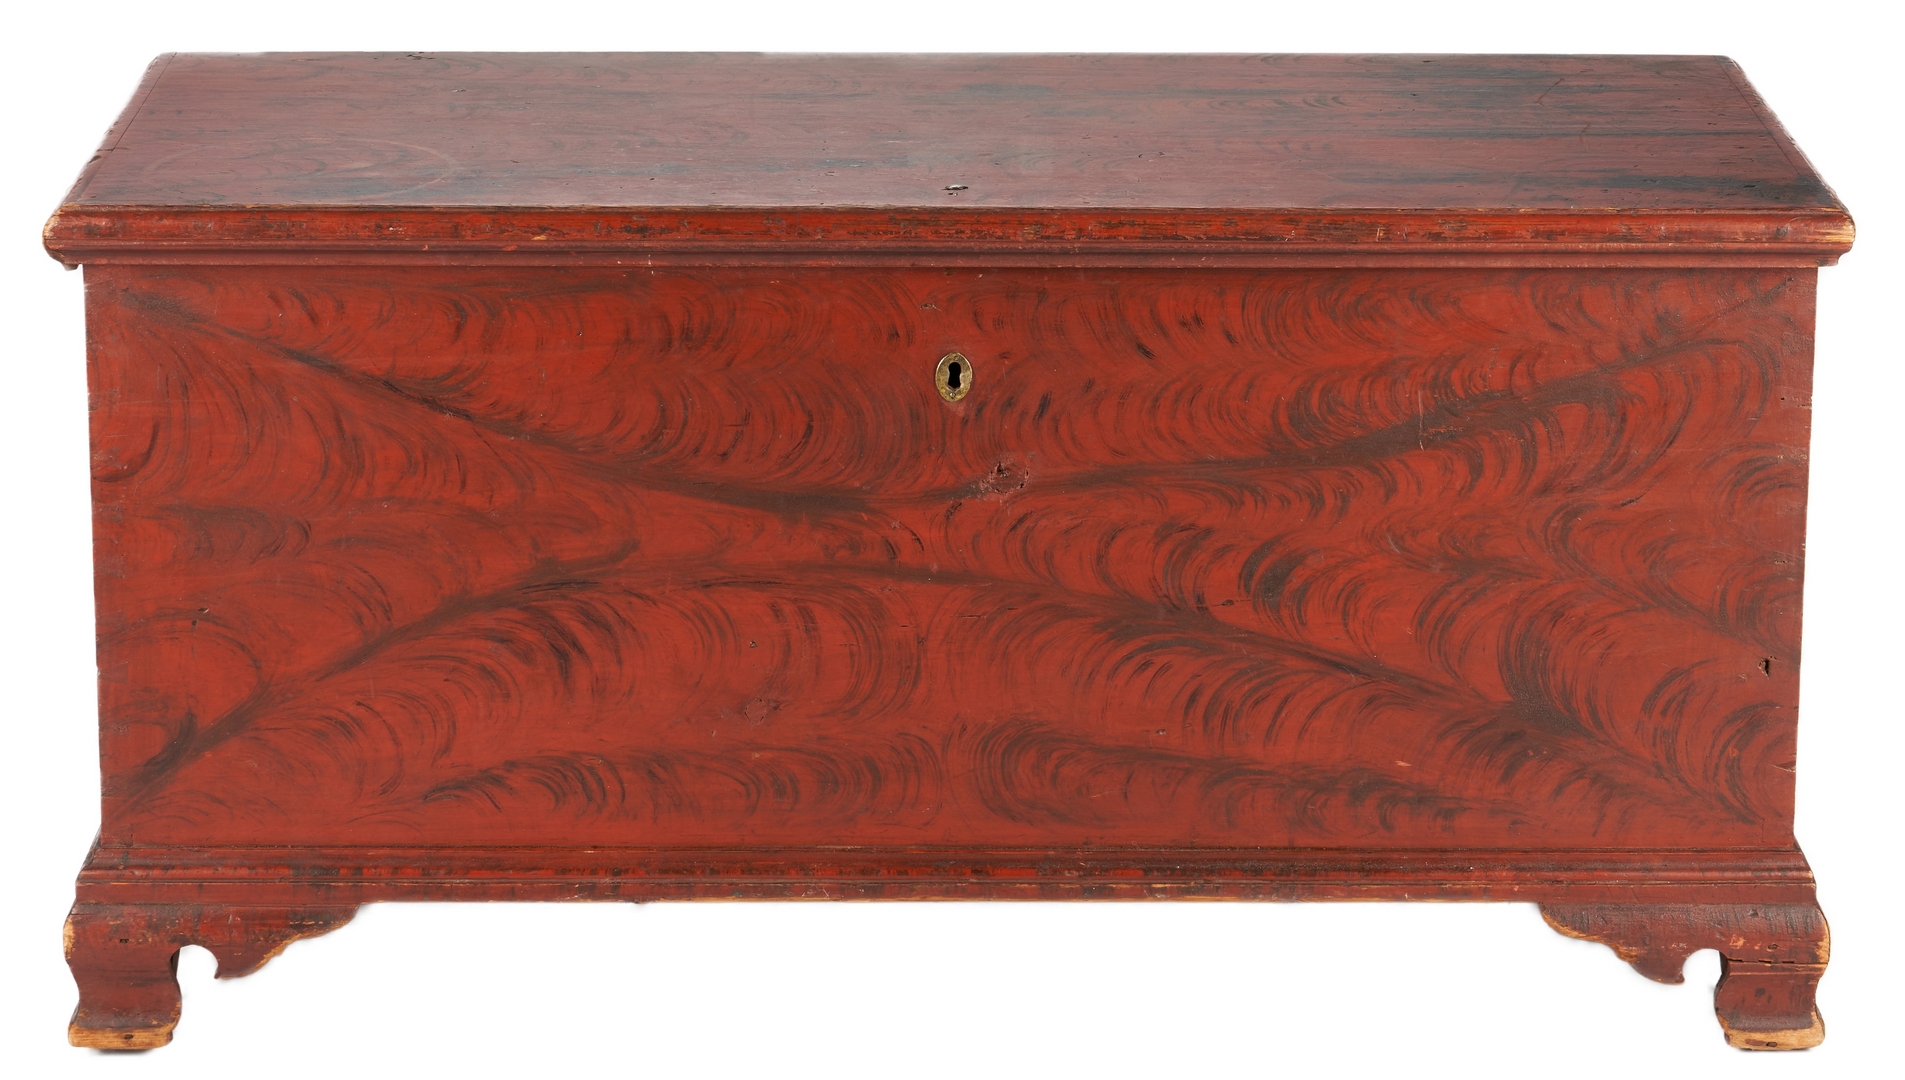 Lot 231: American Painted Blanket Chest with Fraktur